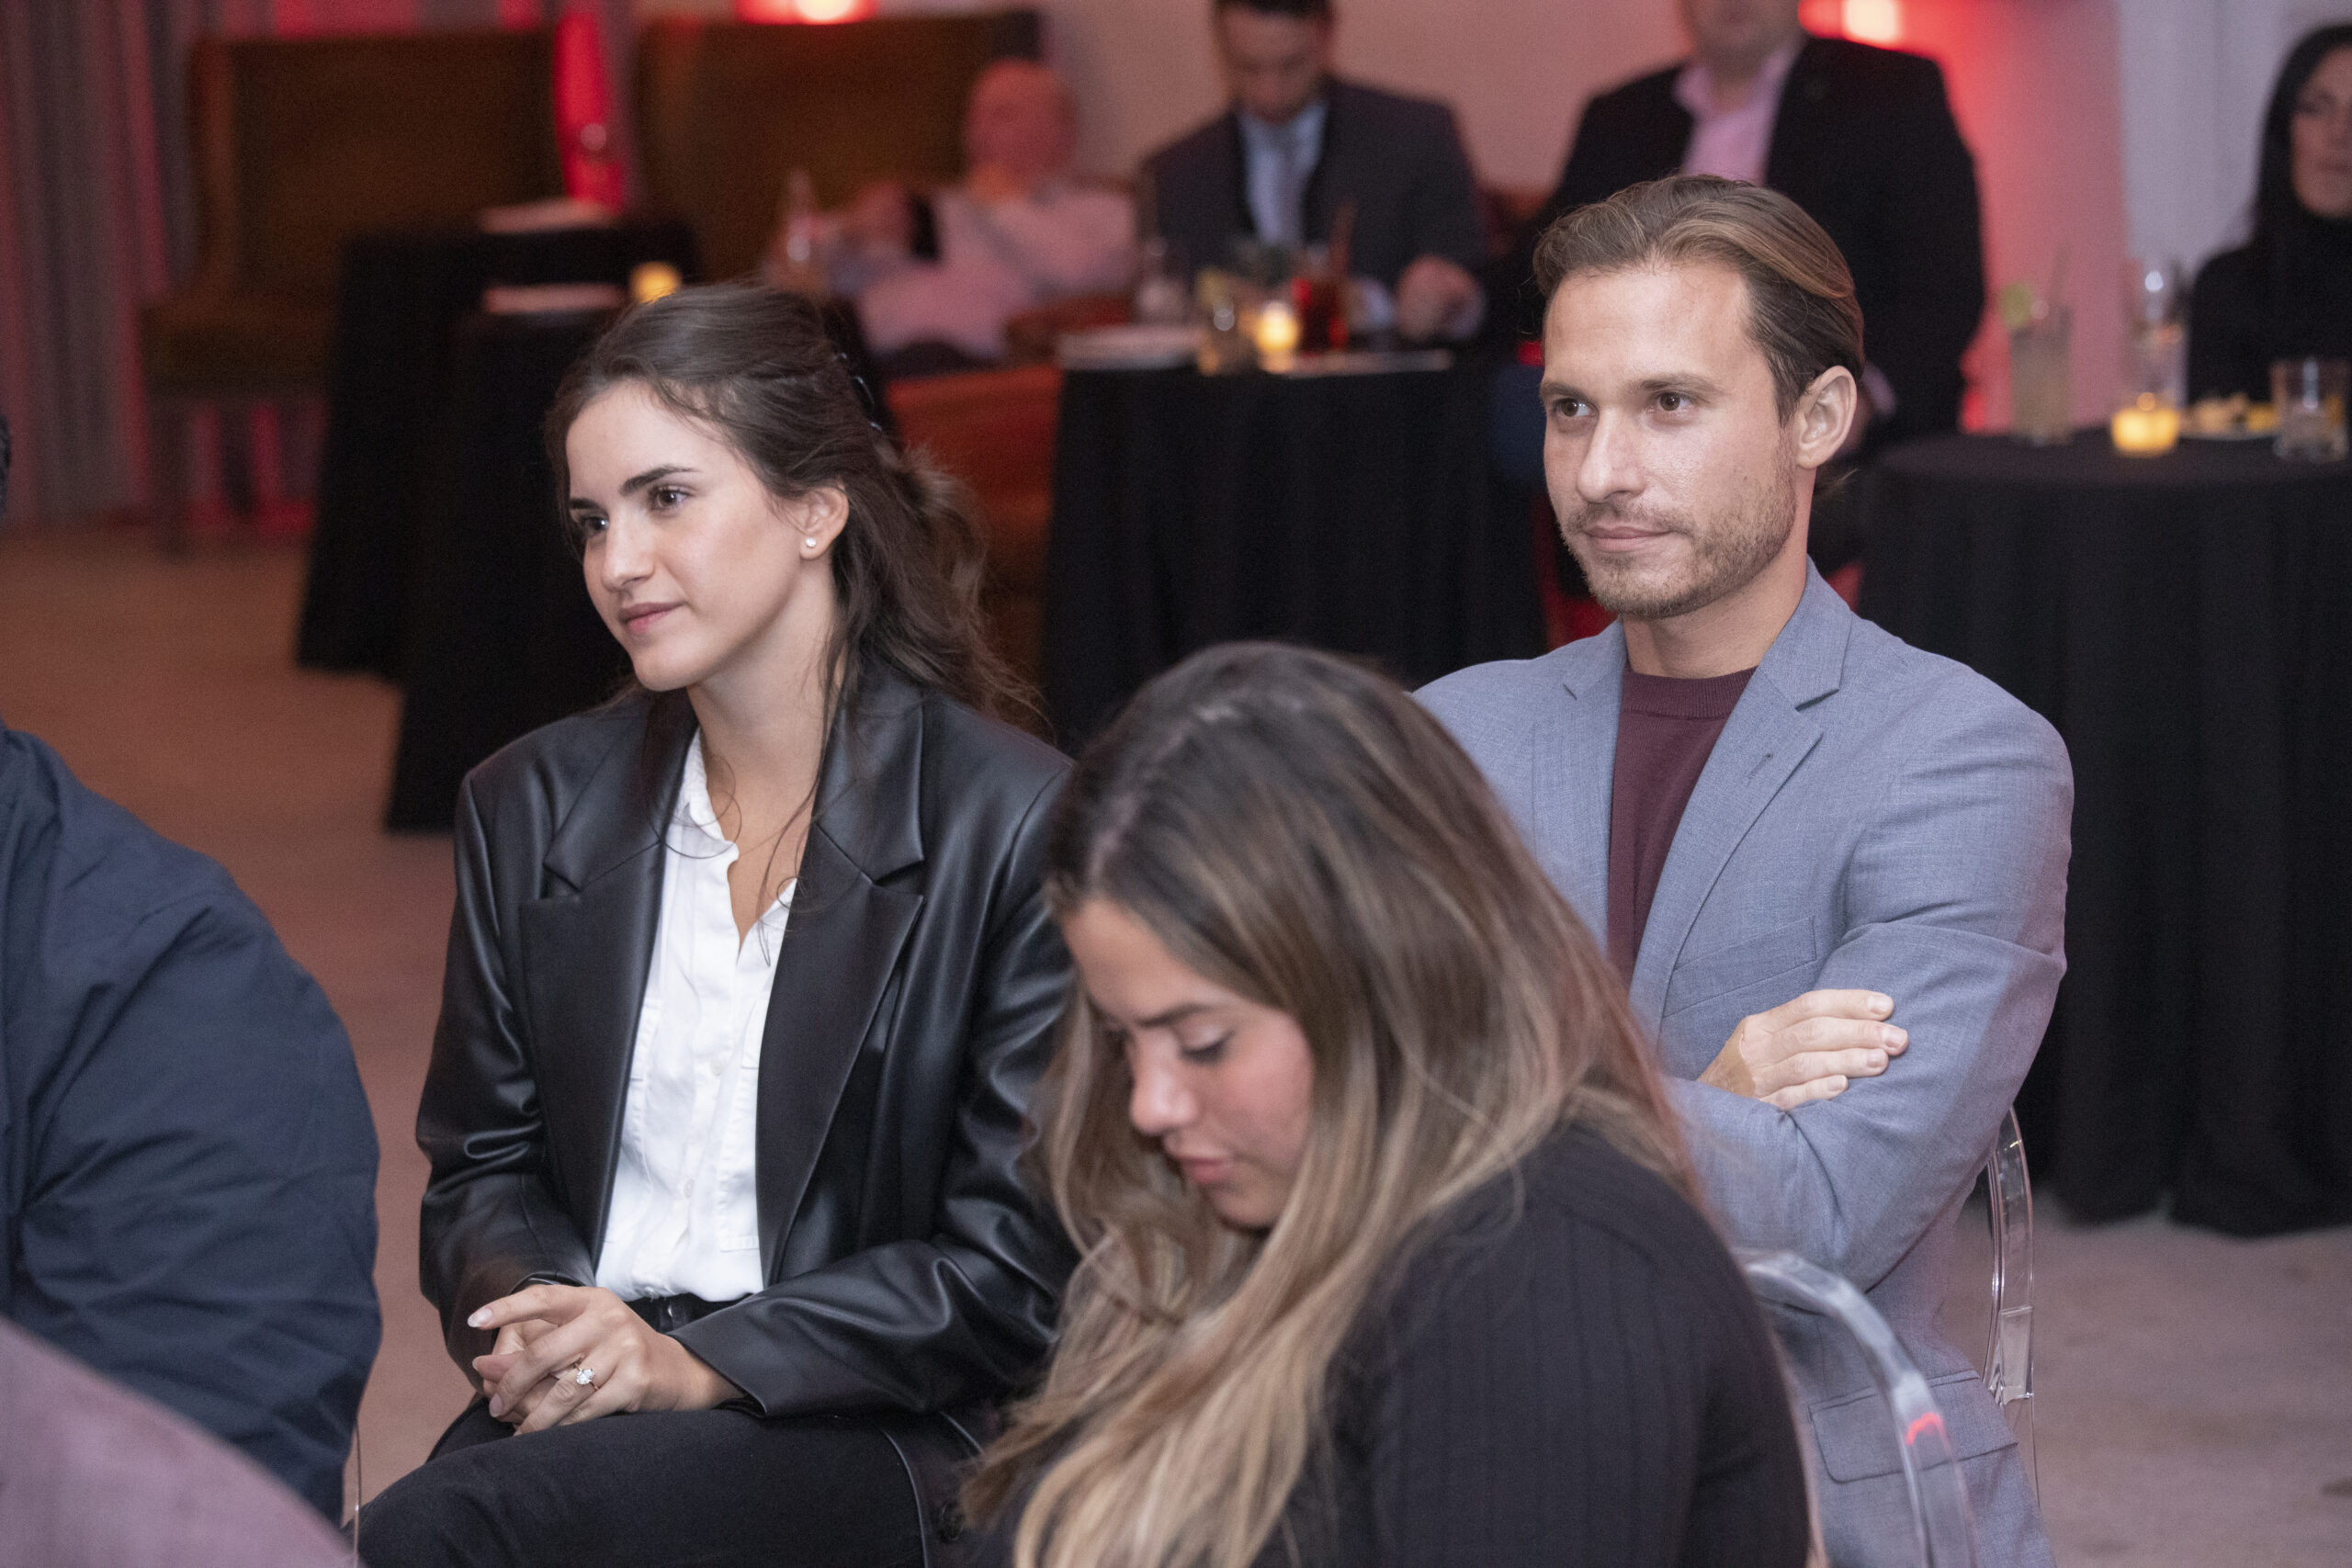 Nicole Serras and Jarad Winter in the Audience at Best of Brooklyn Real Estate Showcase.